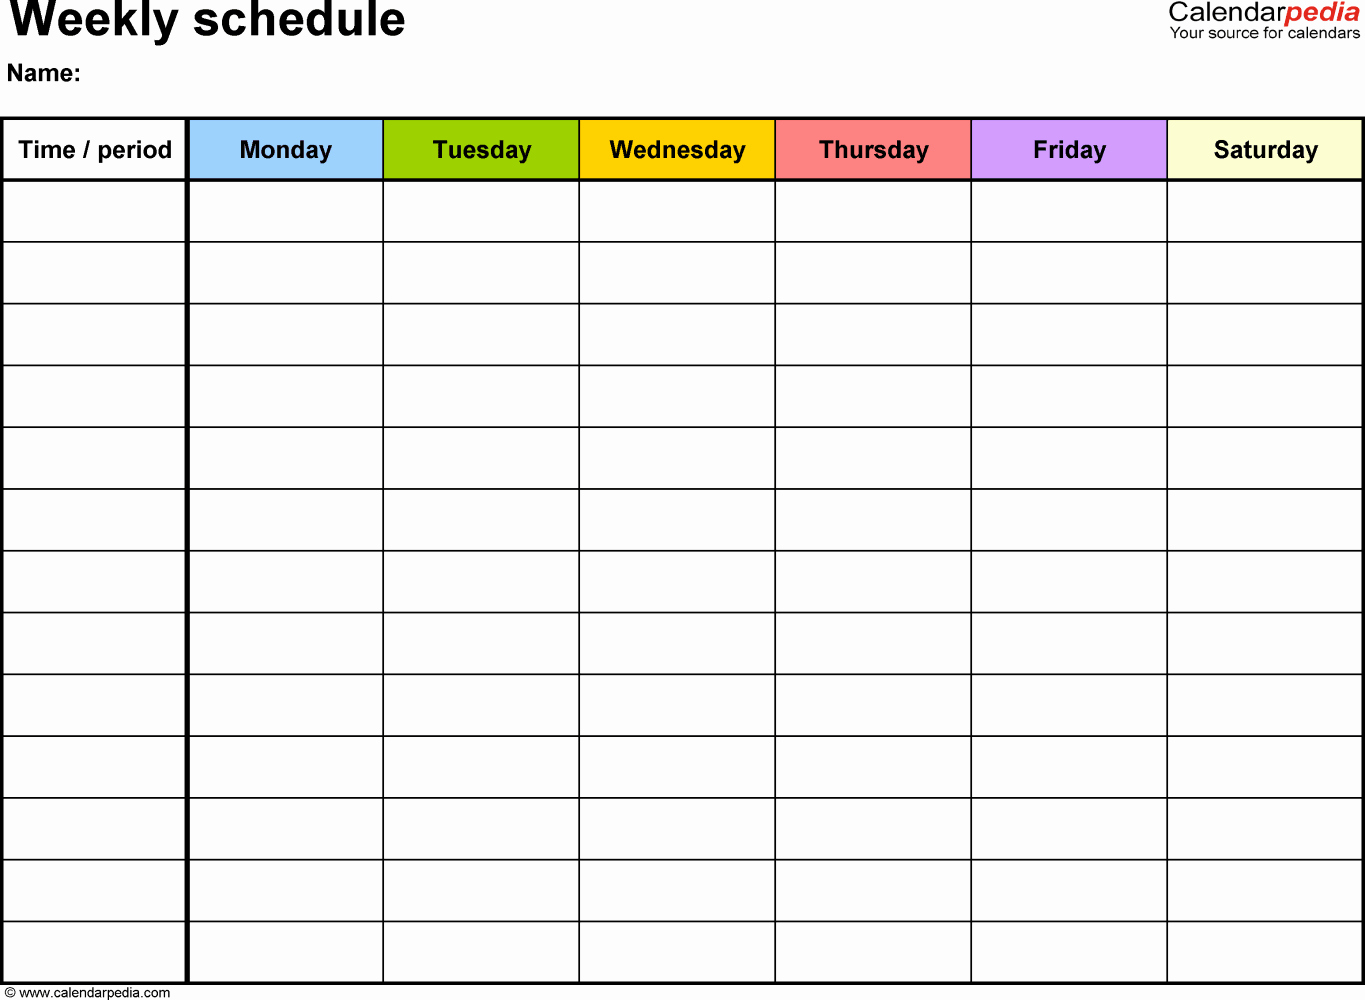 Weekly Schedule Templates Excel Luxury Free Weekly Schedule Templates for Excel 18 Templates